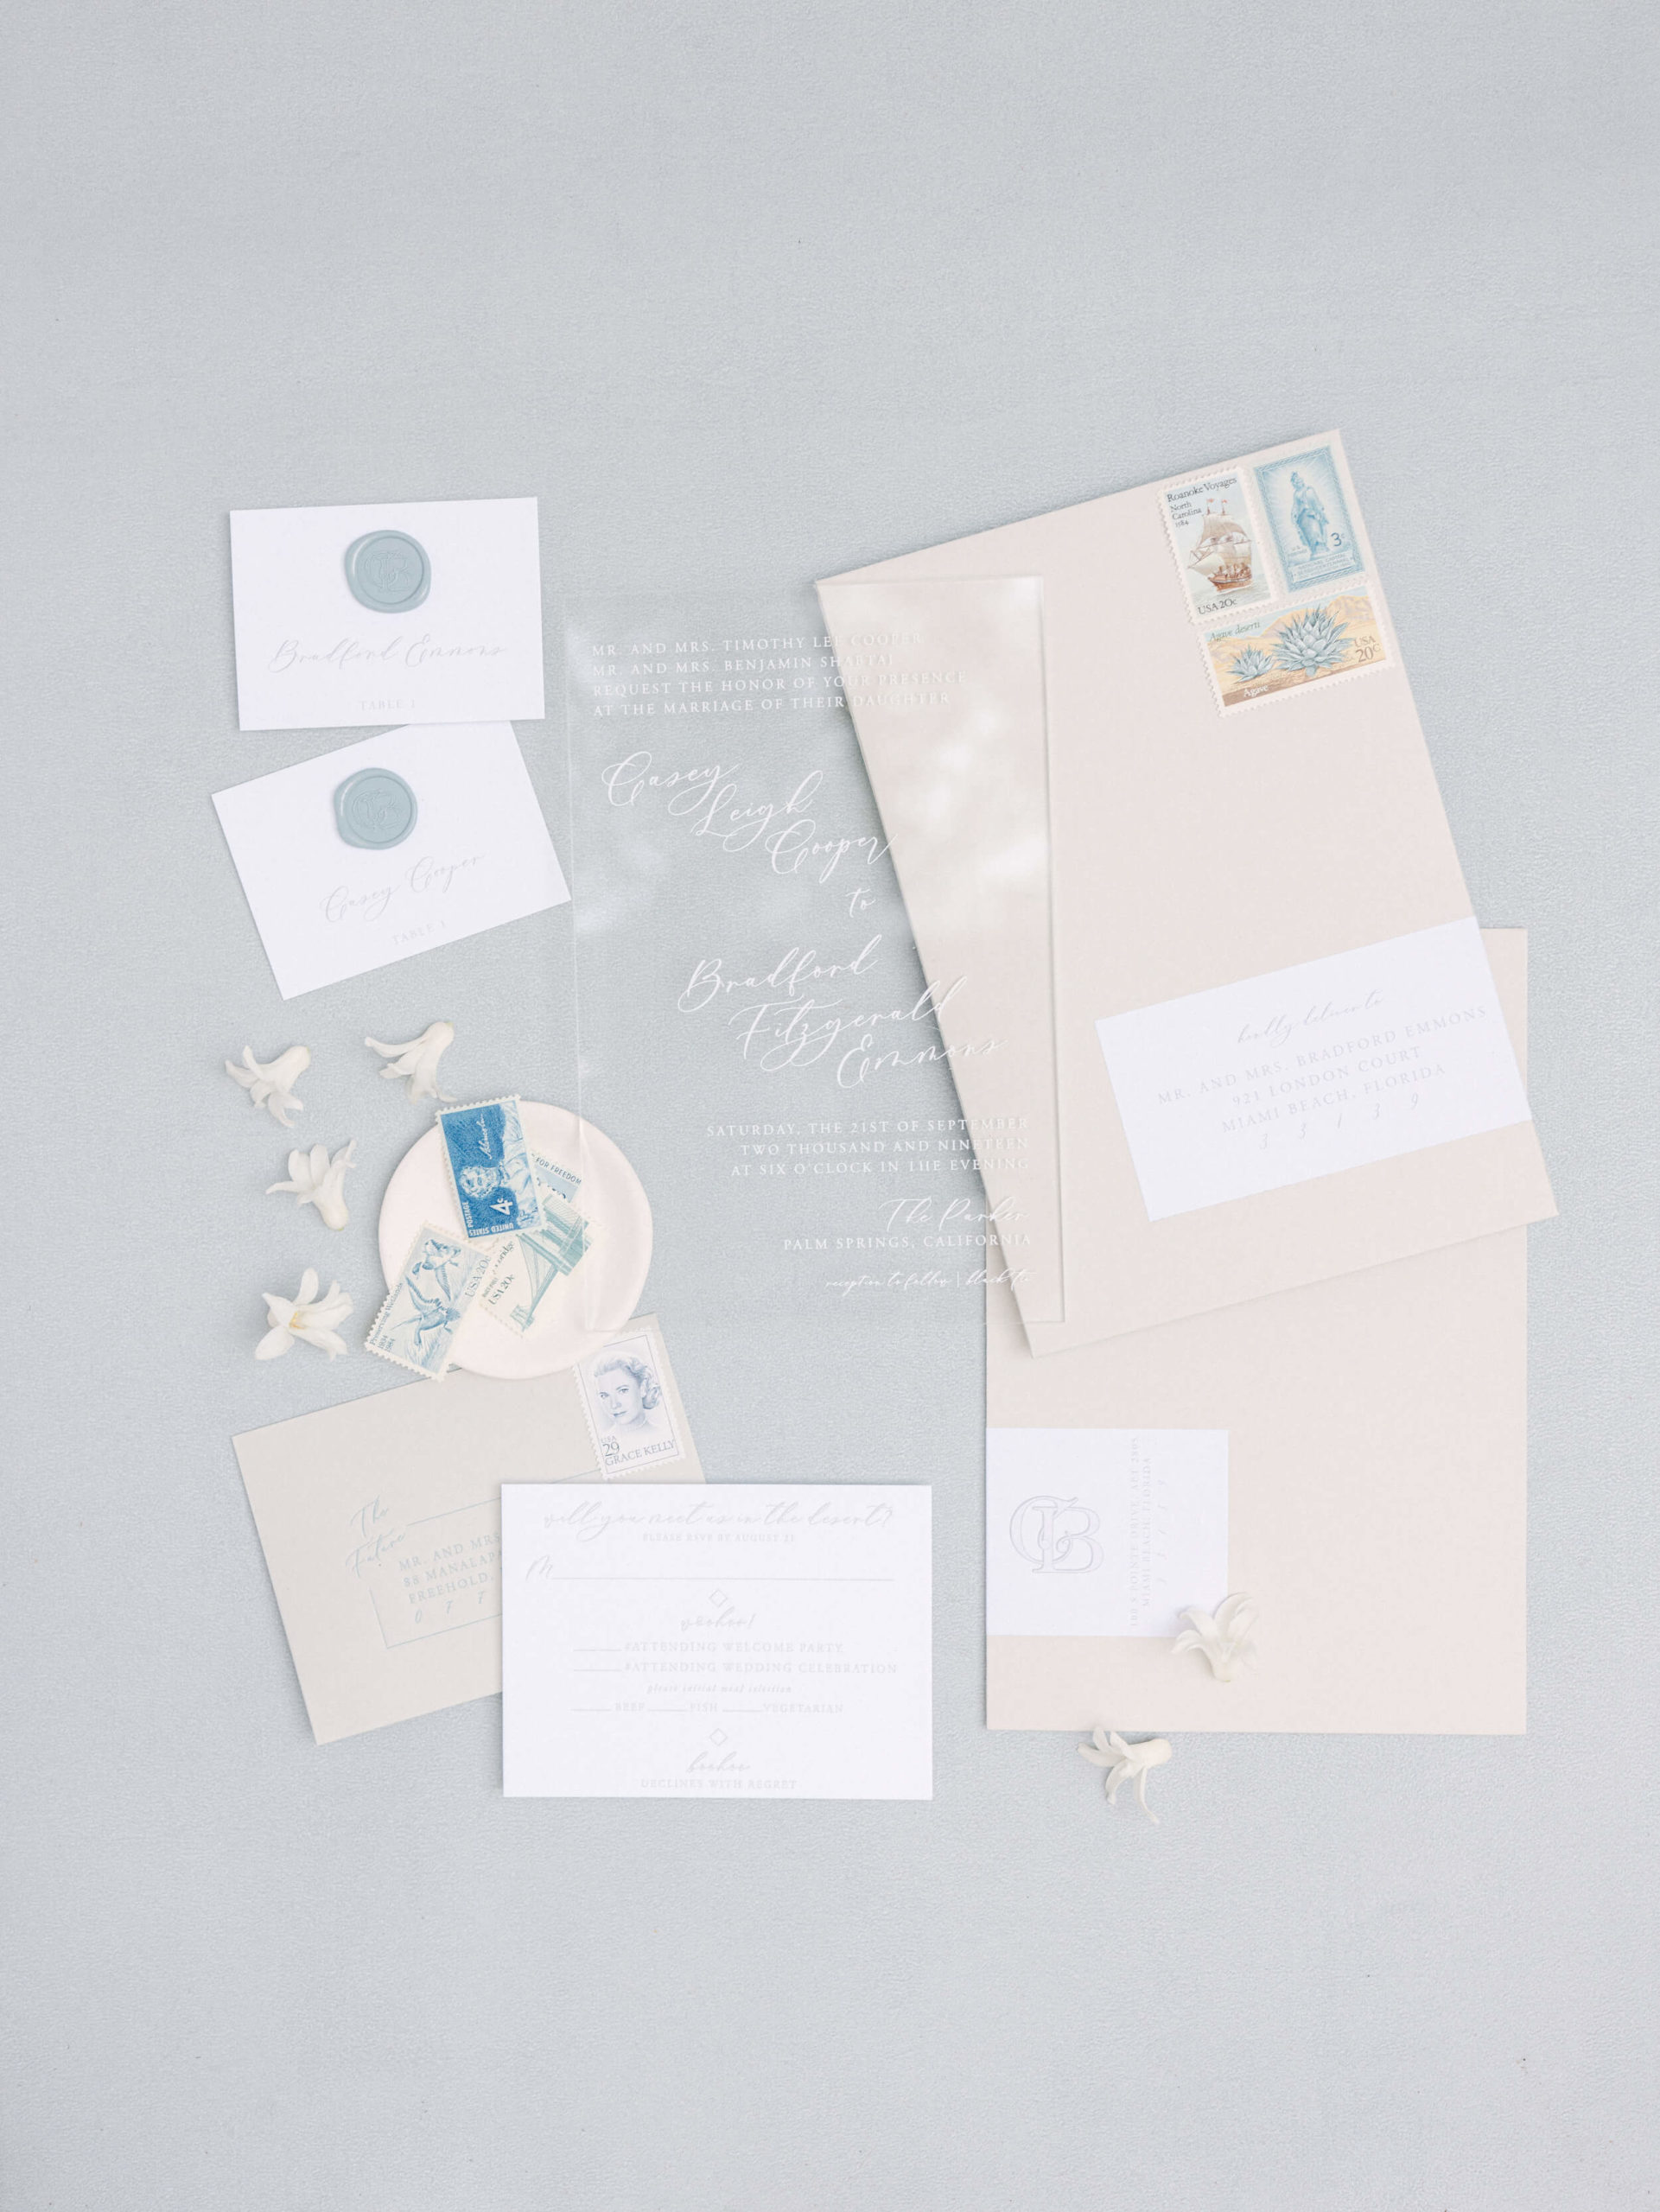 lucite wedding invitation suite by Swell Press